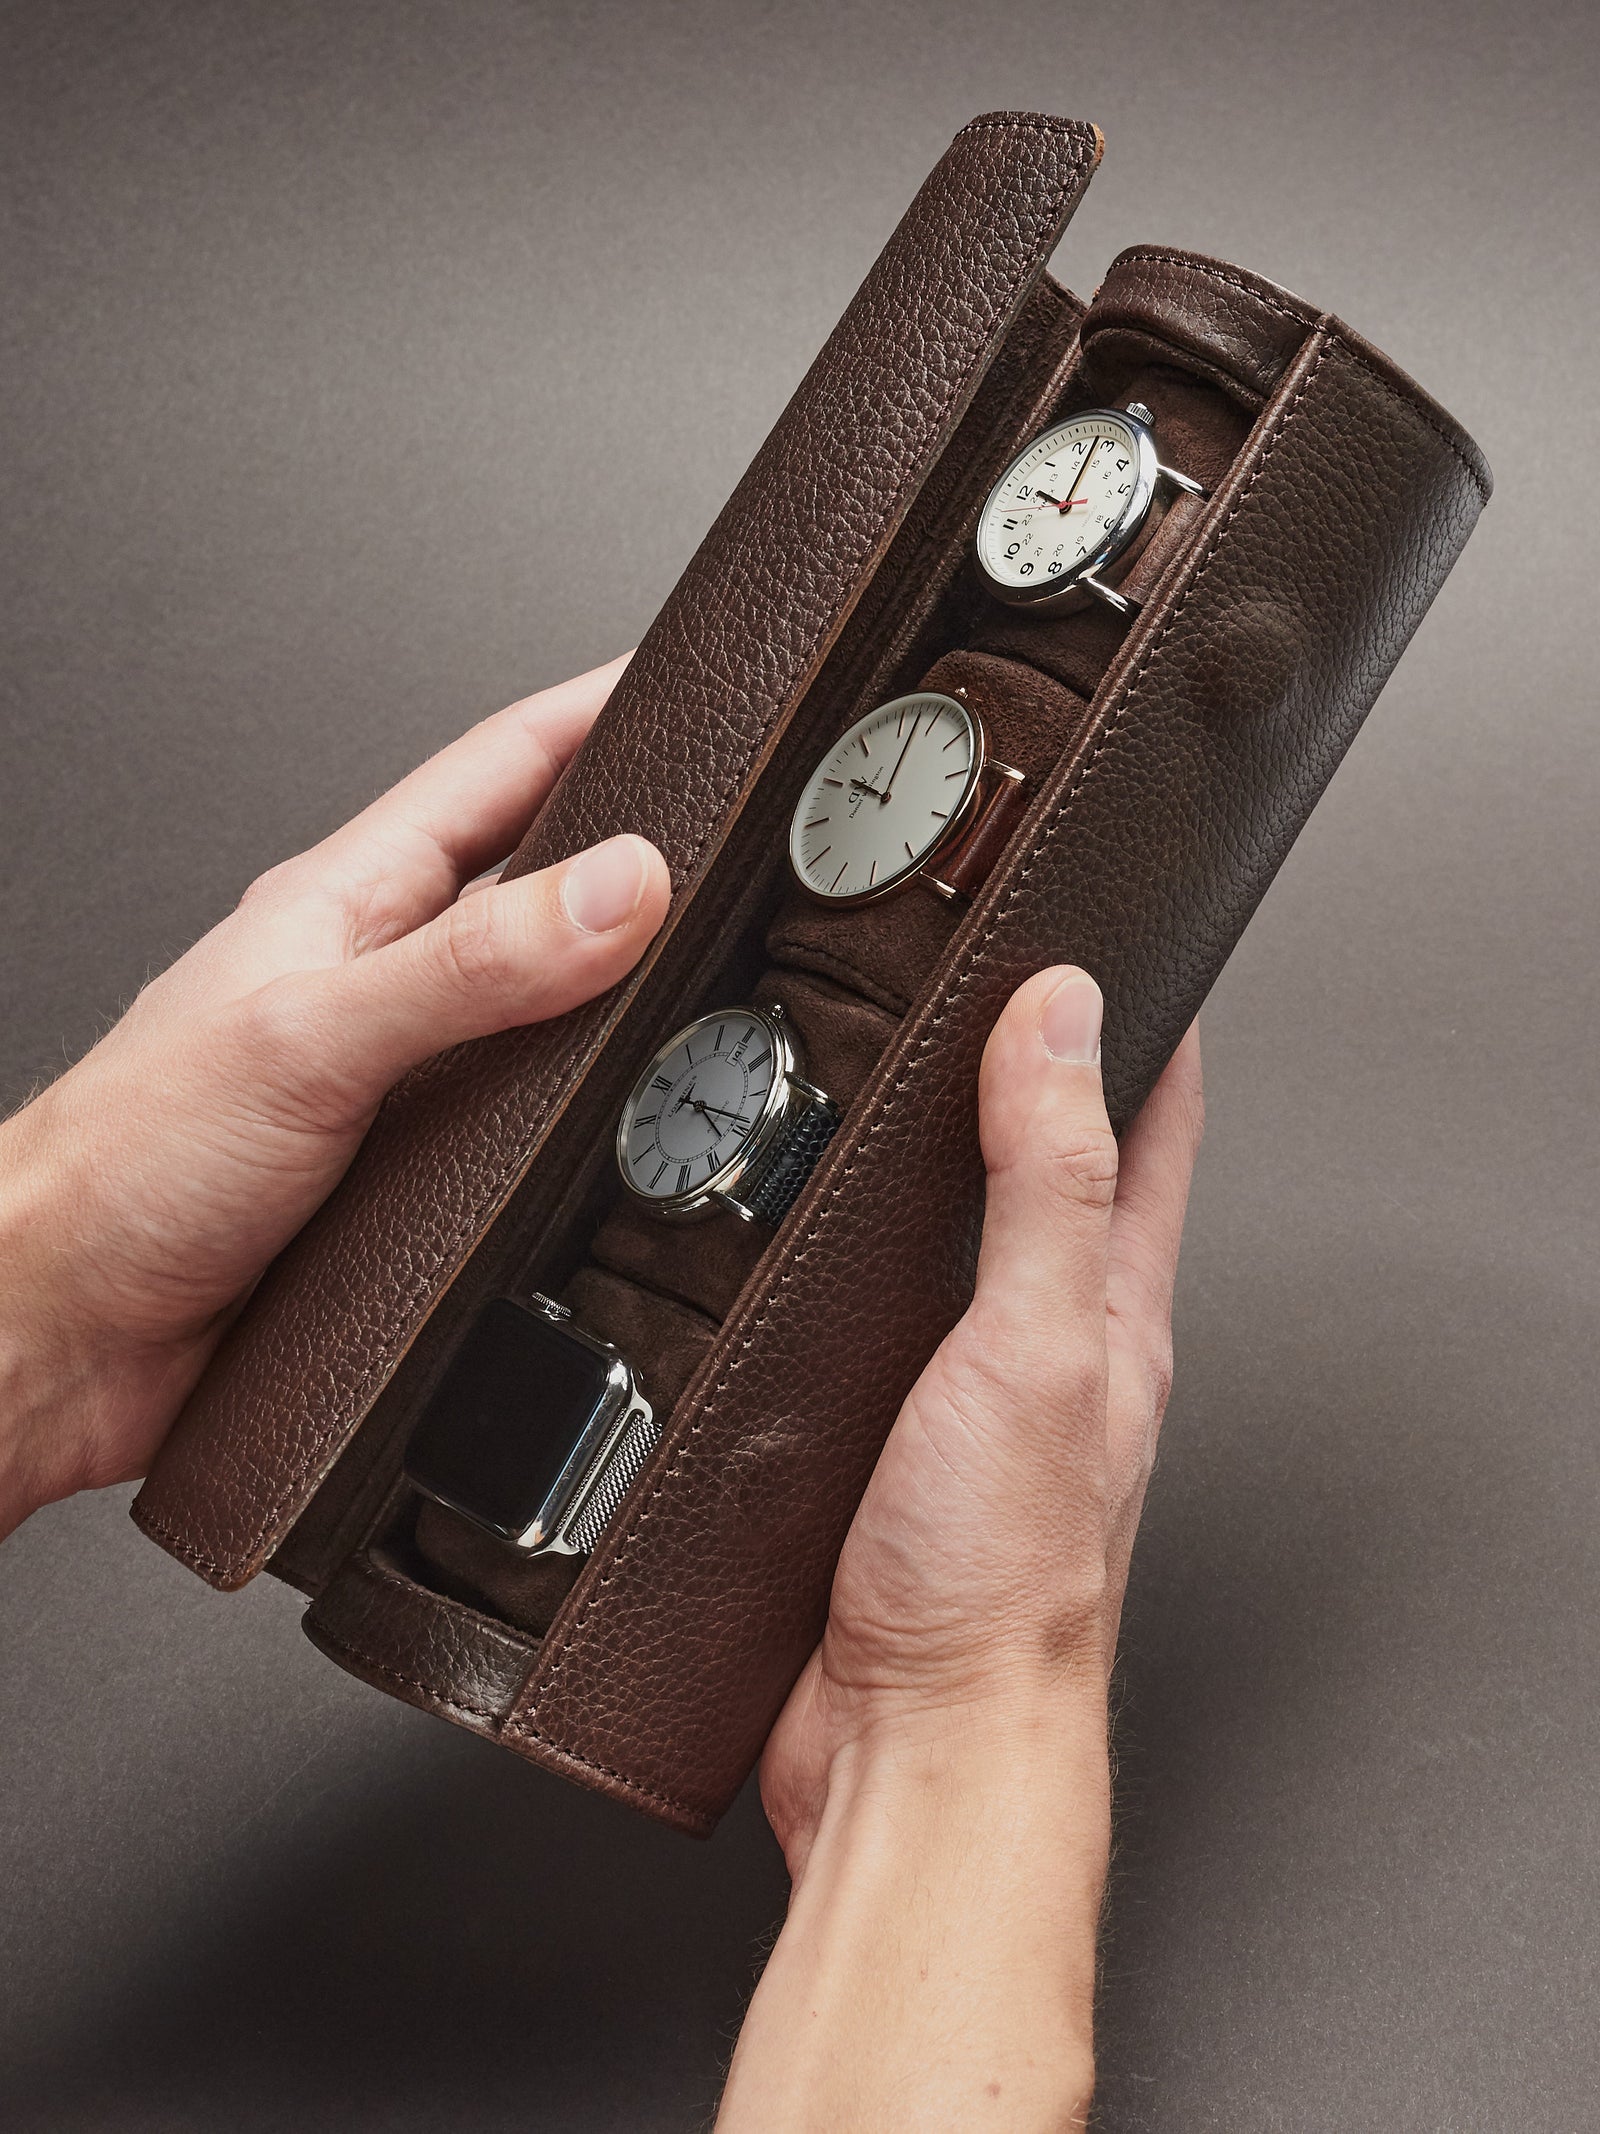 Watch Roll Leather Personalized Watch Roll With Embossed 